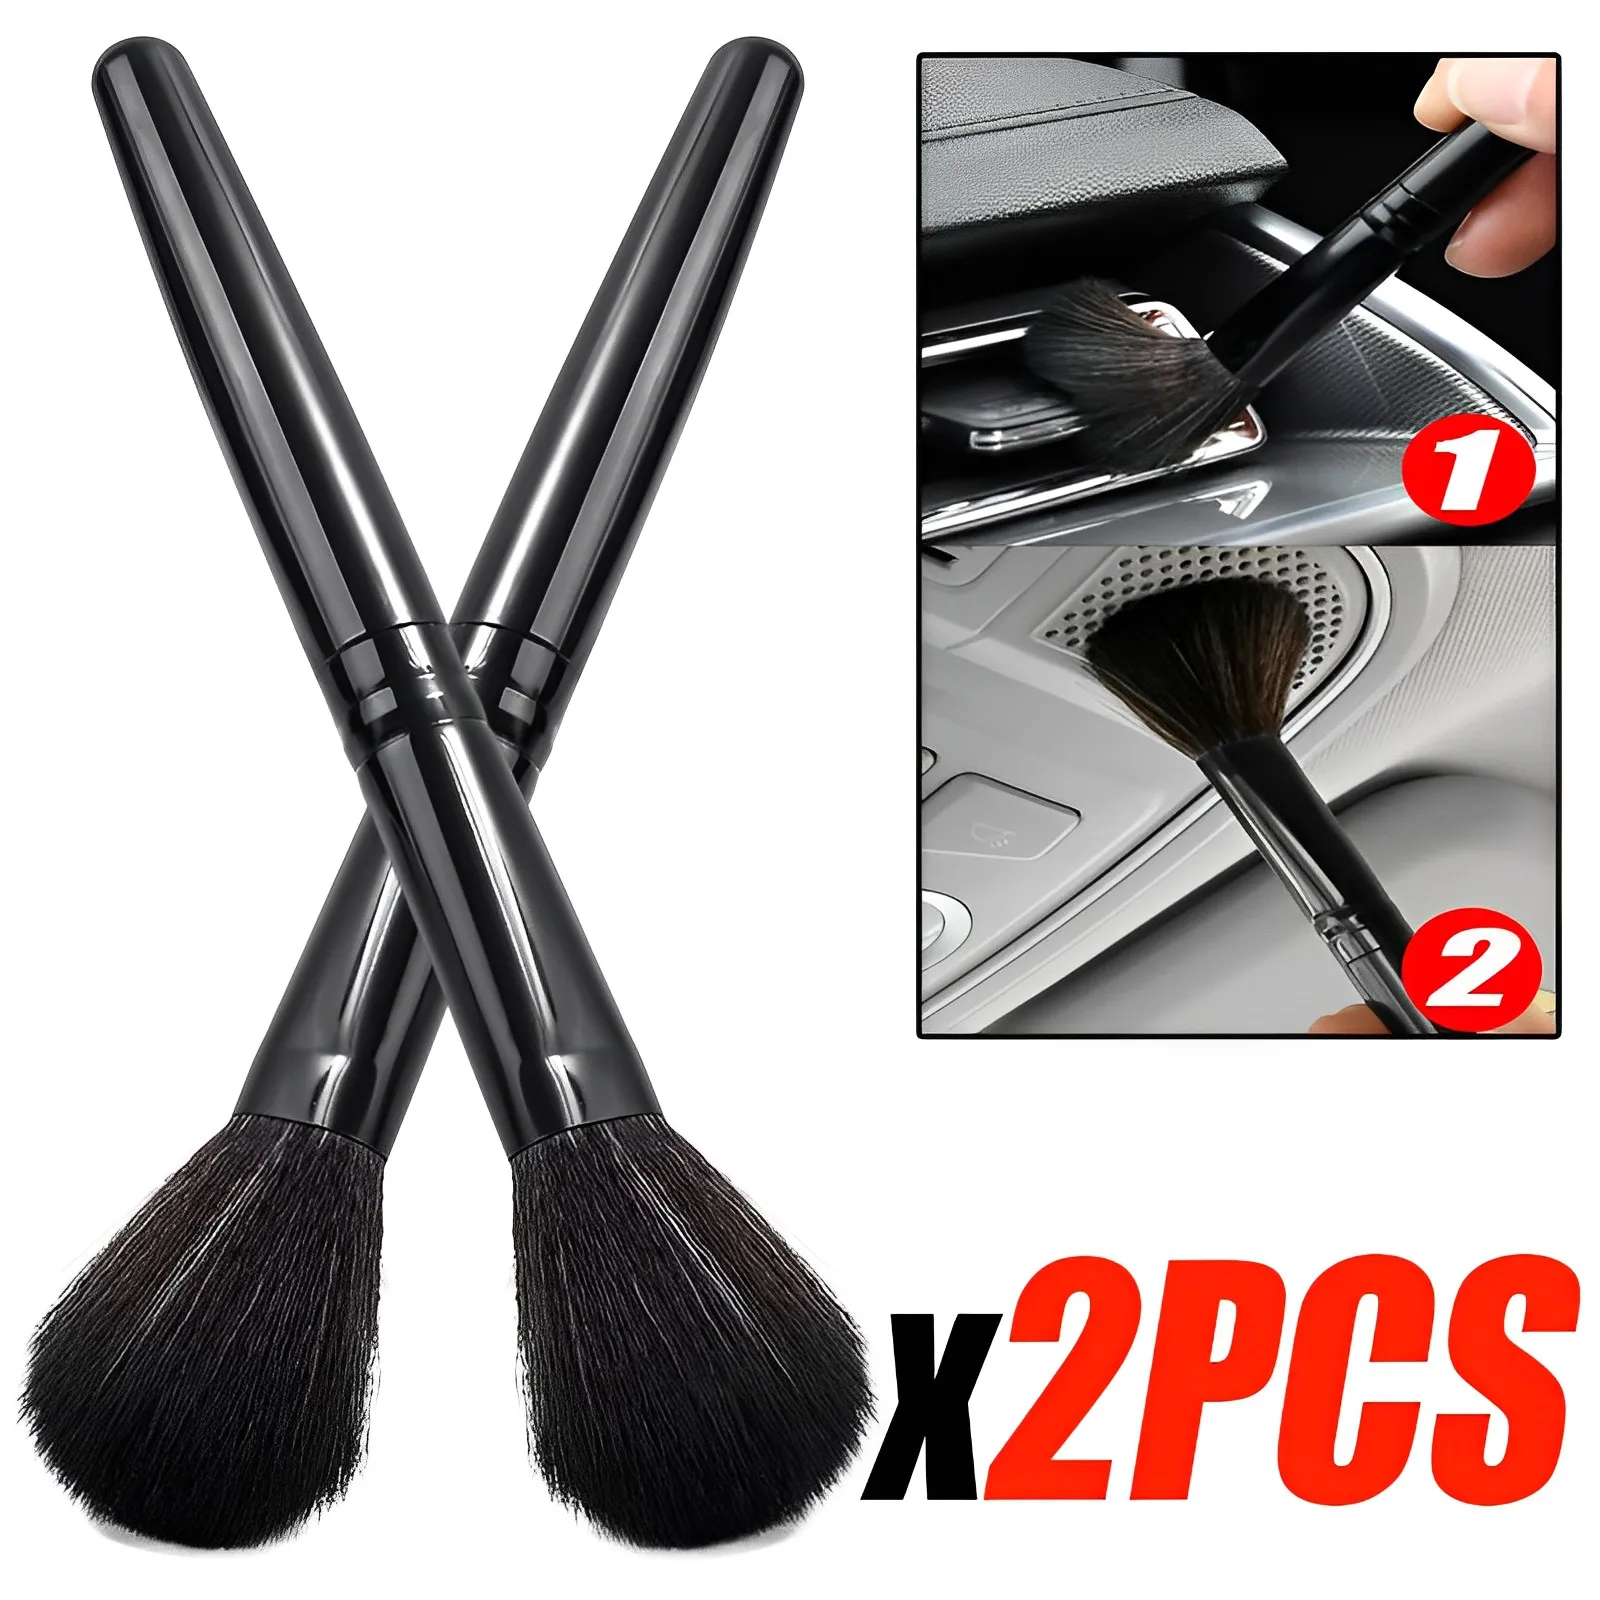 

1/2PCS Car Interior Super Soft Detail Brush Dashboar Air Vents Dusting Brush Portable Cleaning Brush Car Cleaning Tools